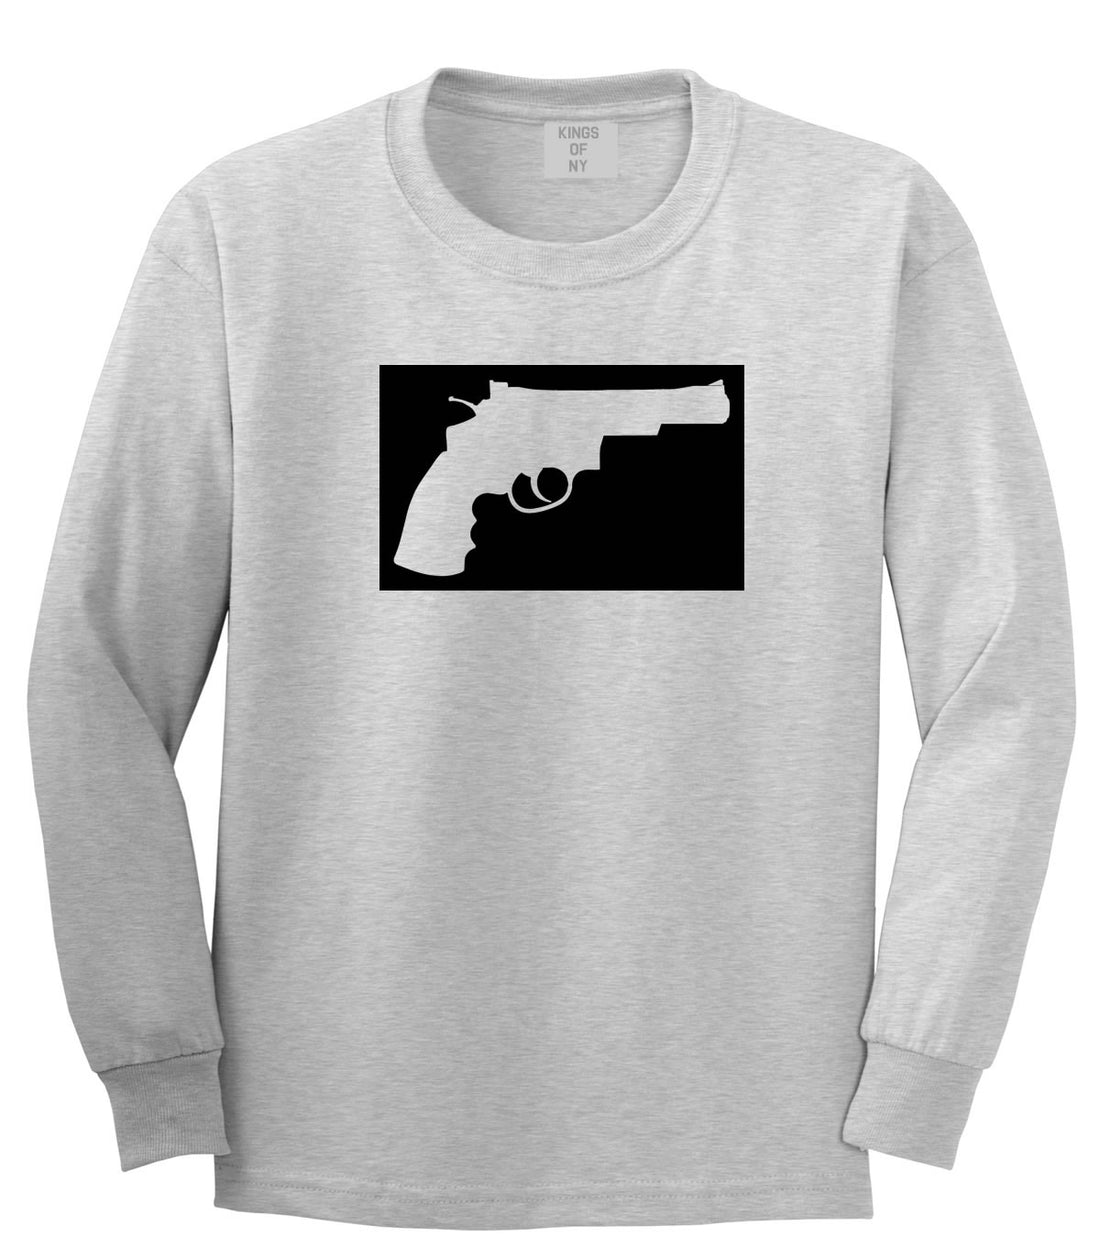 Gun Silhouette Revolver 45 Chrome Long Sleeve T-Shirt in Grey By Kings Of NY